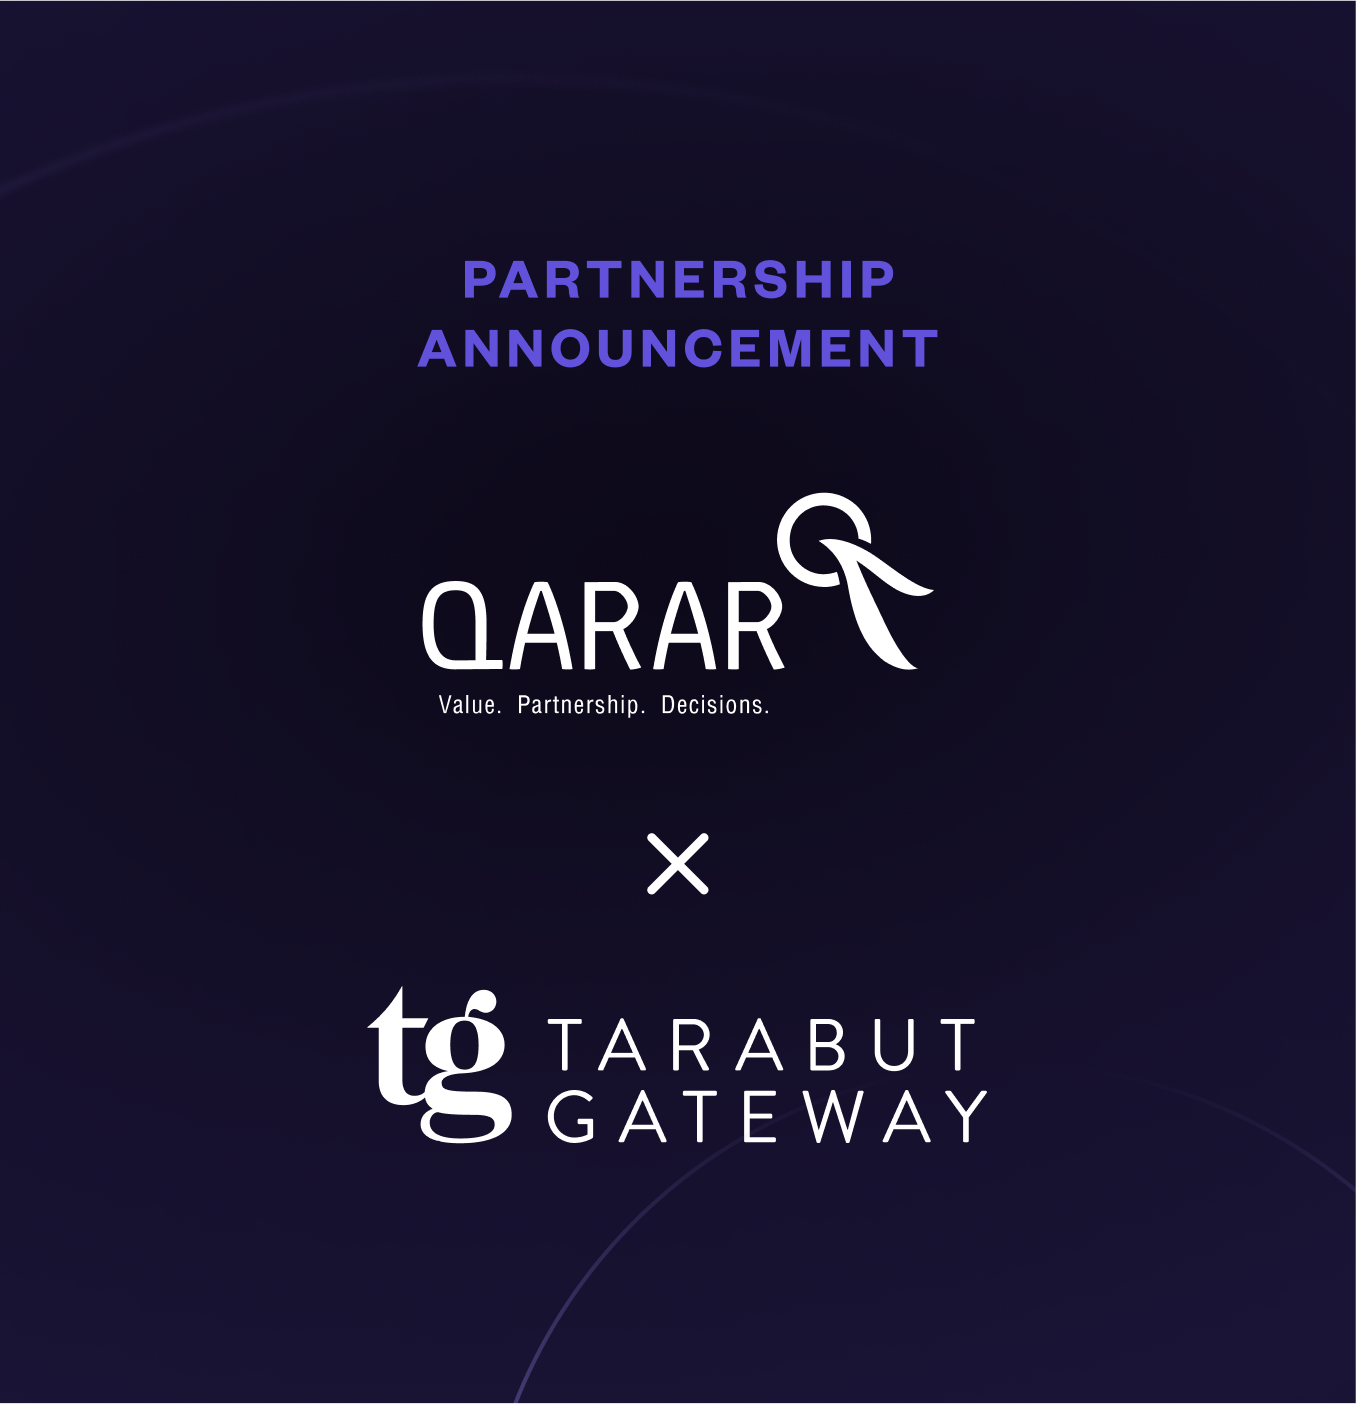  Tarabut Gateway Partners with Qarar to Revolutionise Credit Scoring and Lending in the Middle East